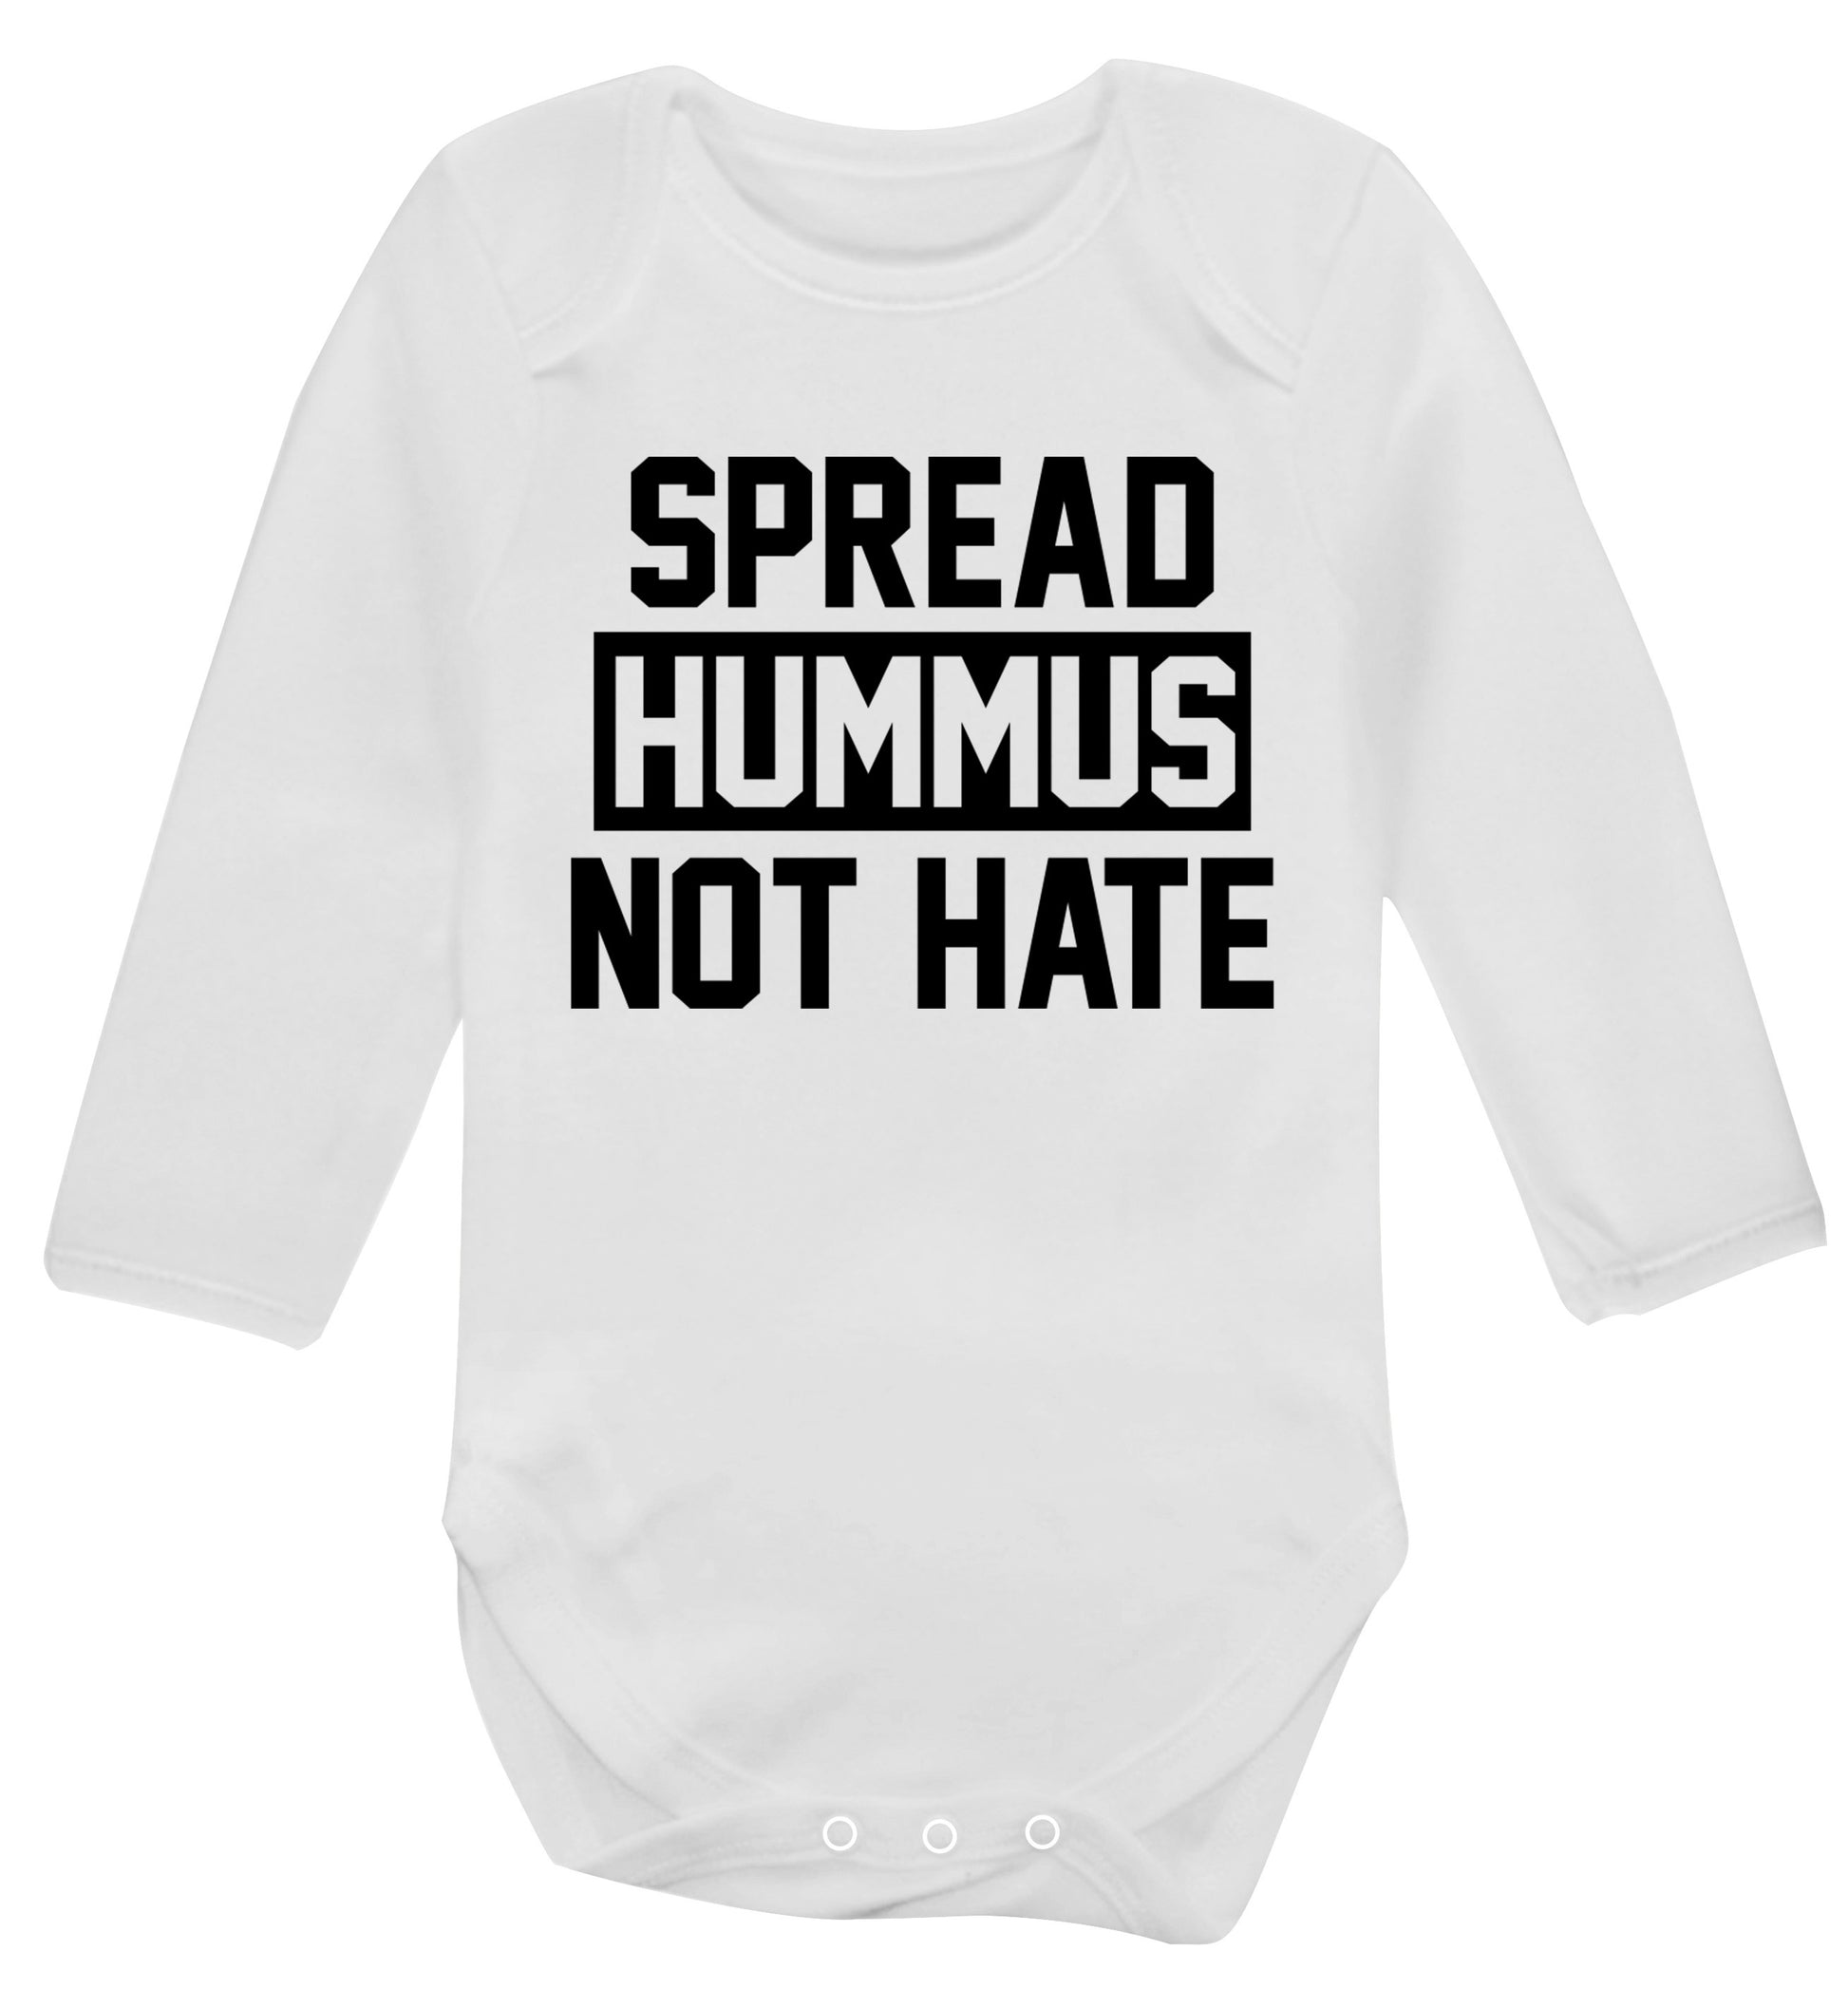 Spread hummus not hate Baby Vest long sleeved white 6-12 months